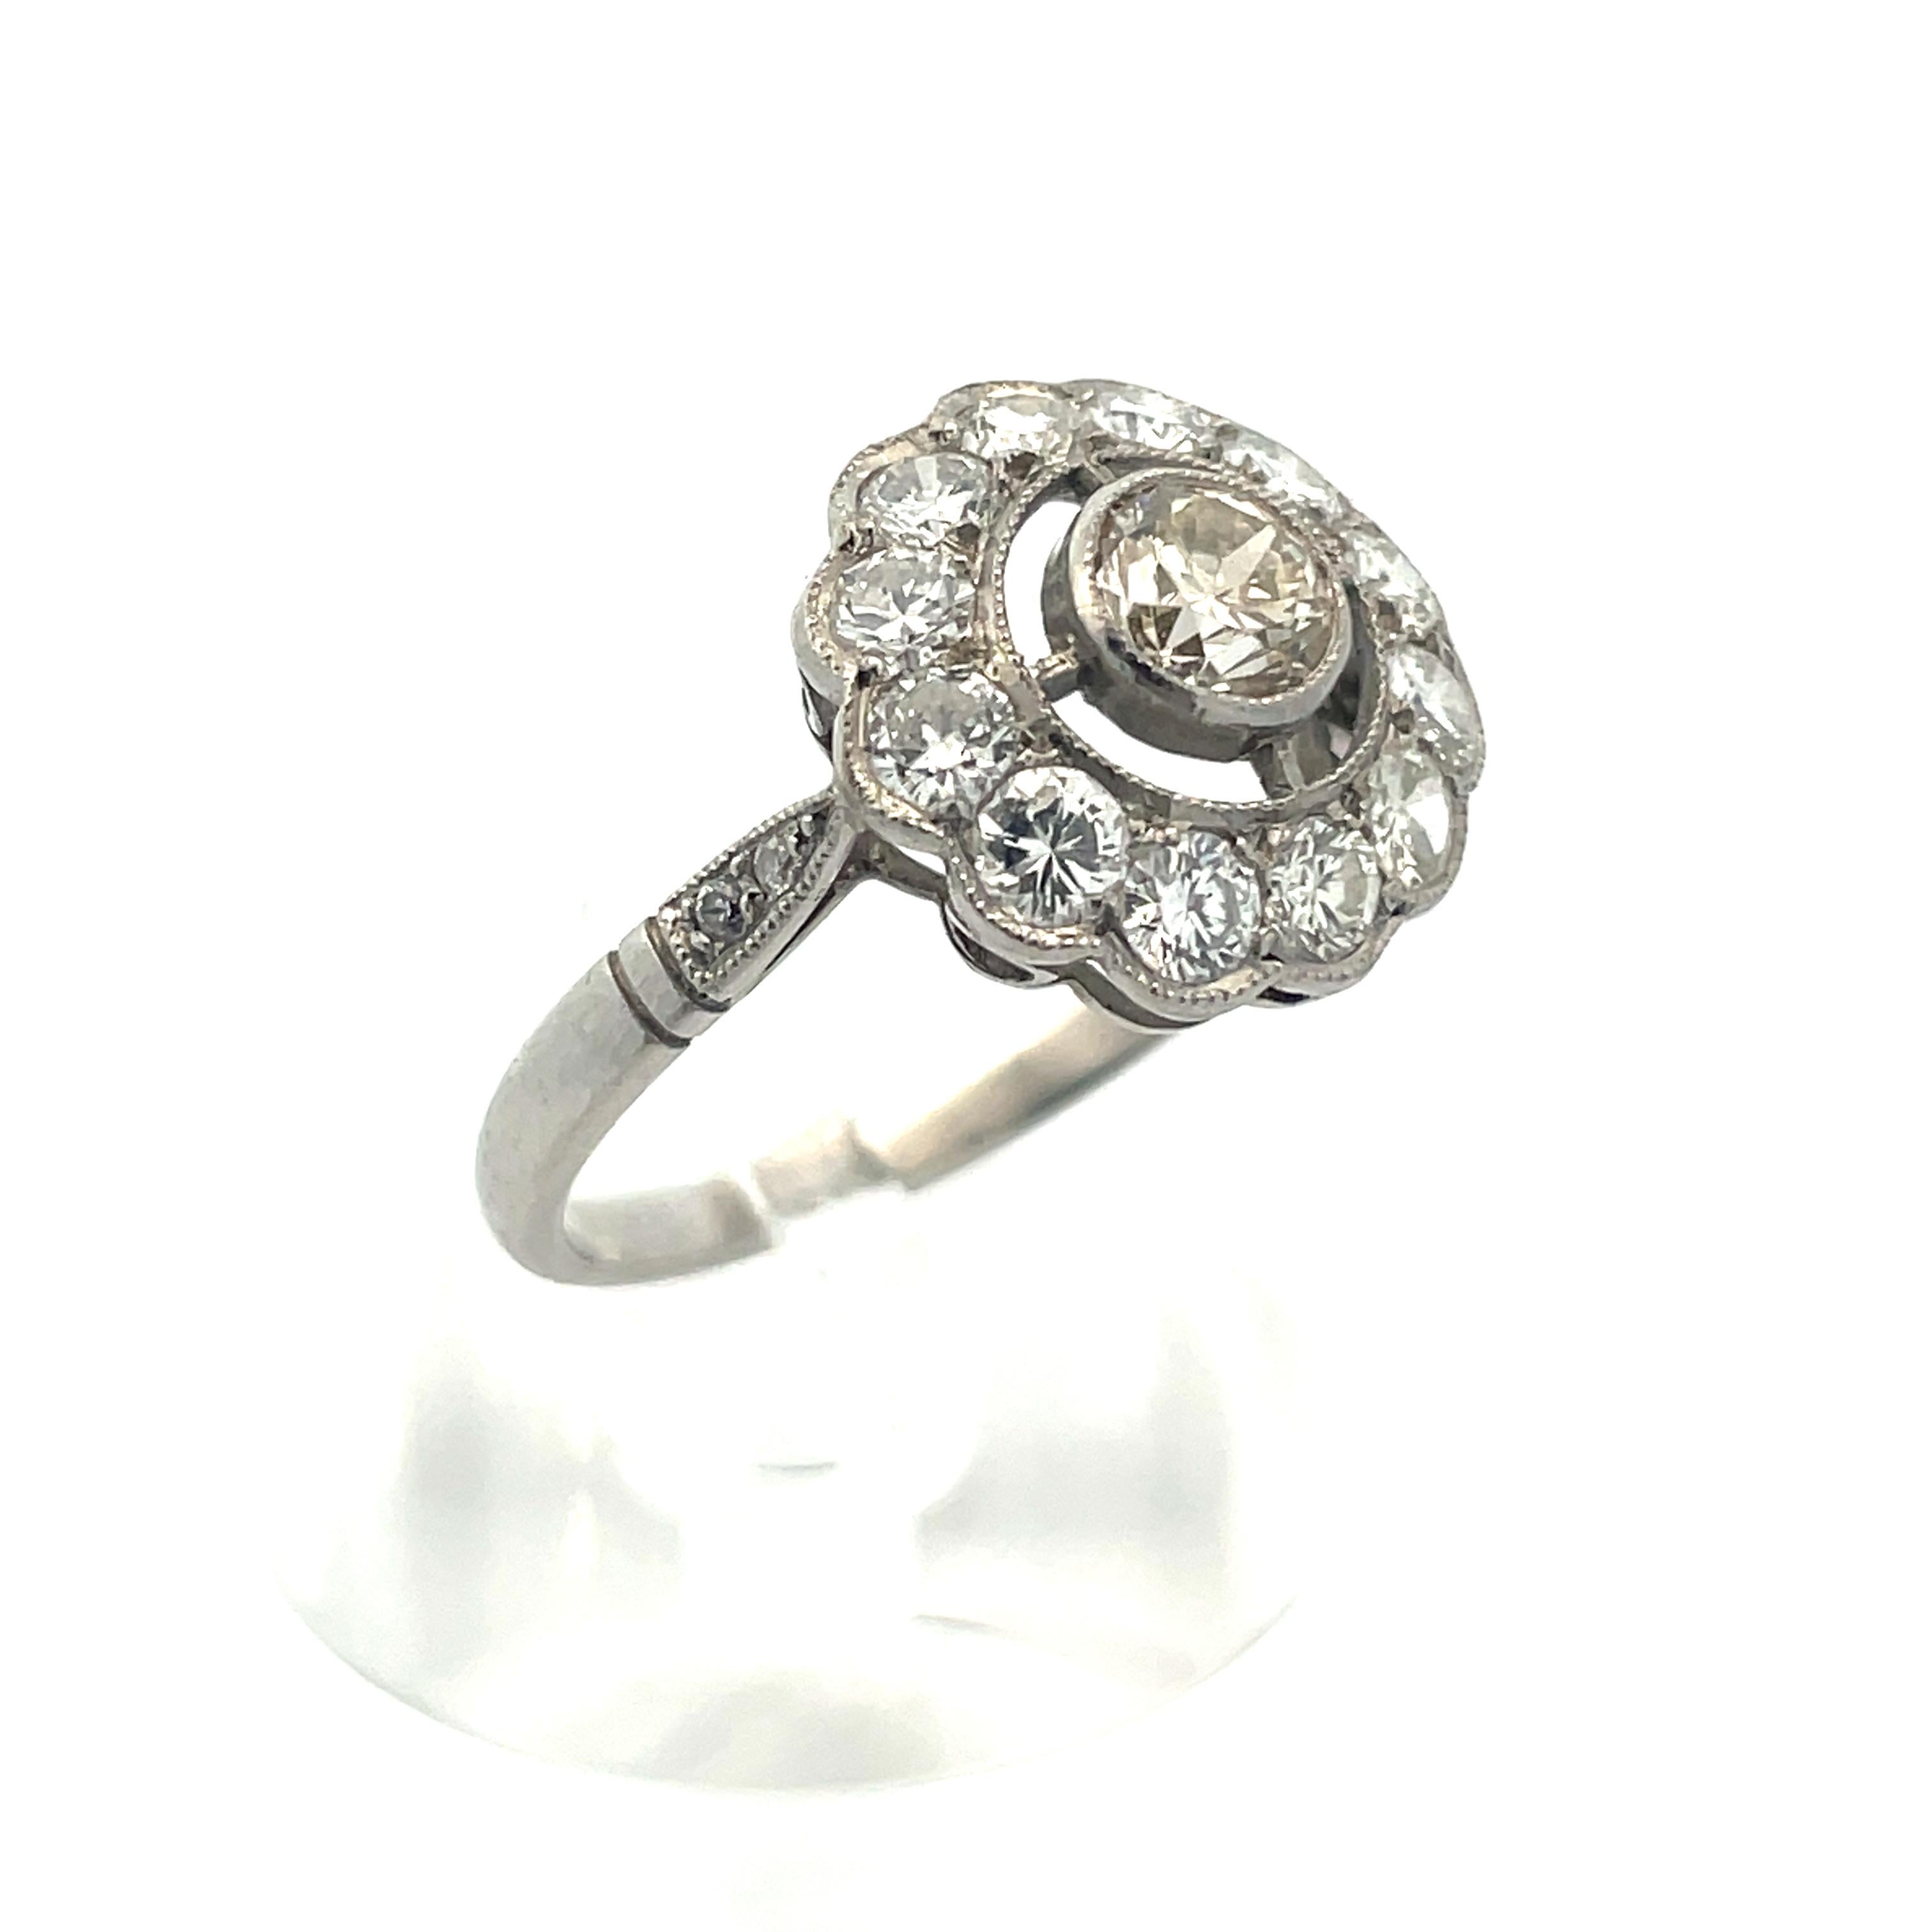 This beautiful French platinum ring features a warm center diamond, surrounded by 12 brilliant white diamonds. The warm center stone, indicative of the period, is a .70 ct VS1 K color diamond. The 1.66 tw VS1 D color surrounding diamonds give this